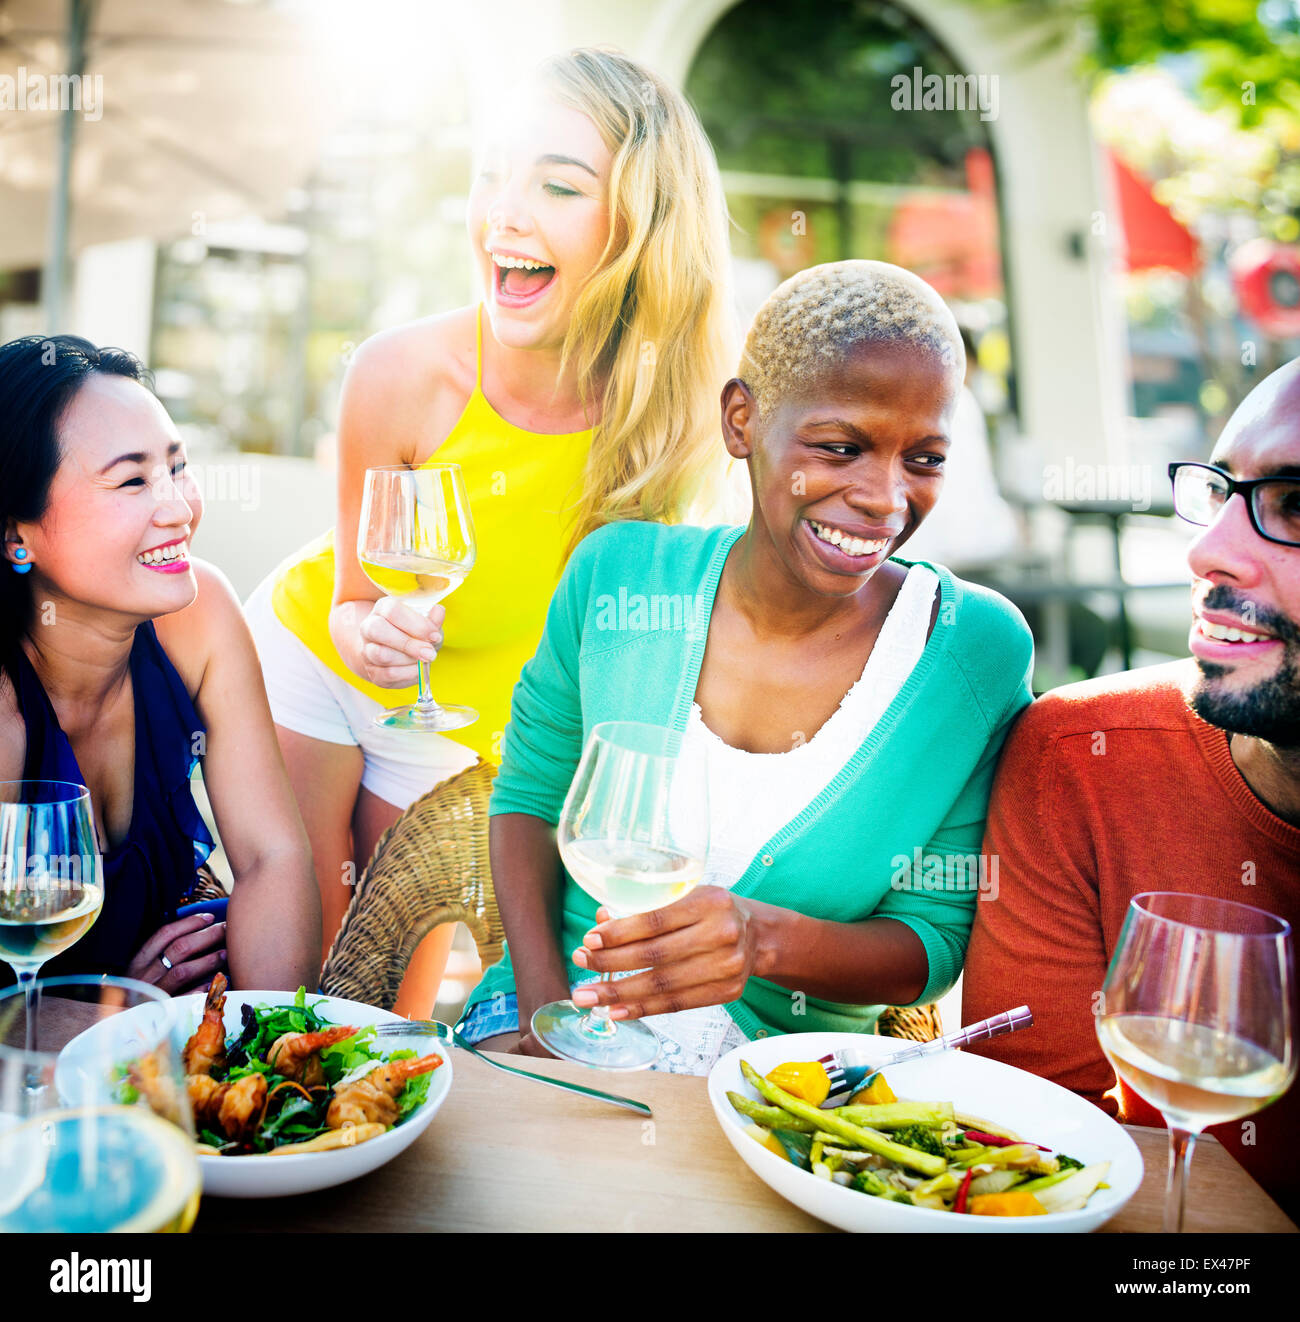 Diverse People Luncheon Outdoors Food Concept Stock Photo